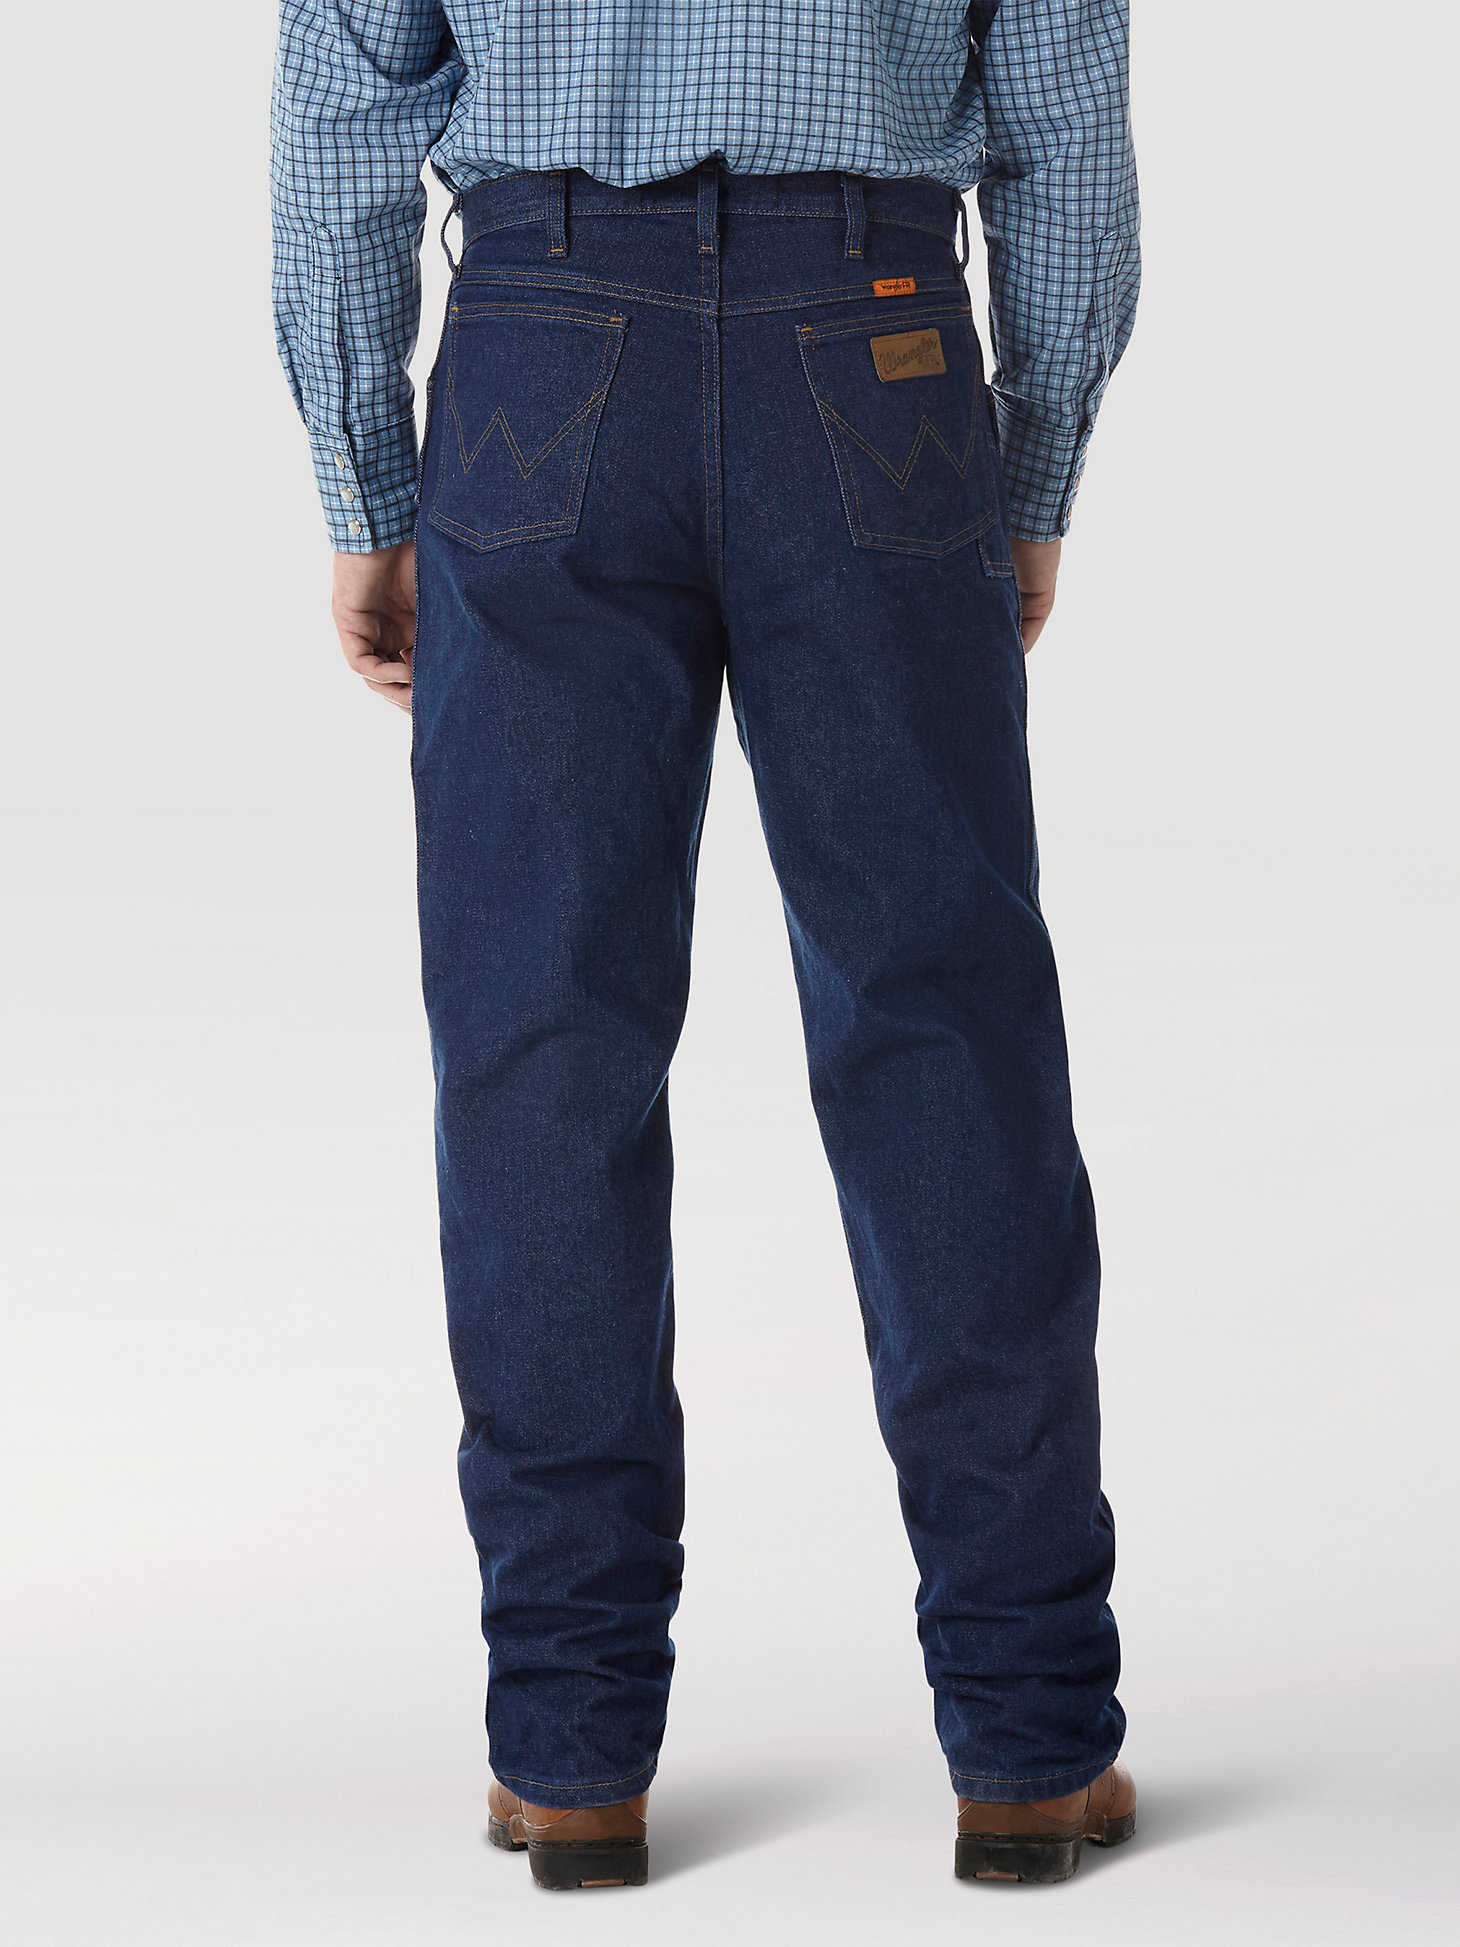 Wrangler® FR Flame Resistant Relaxed Fit Jean in PREWASH alternative view 2